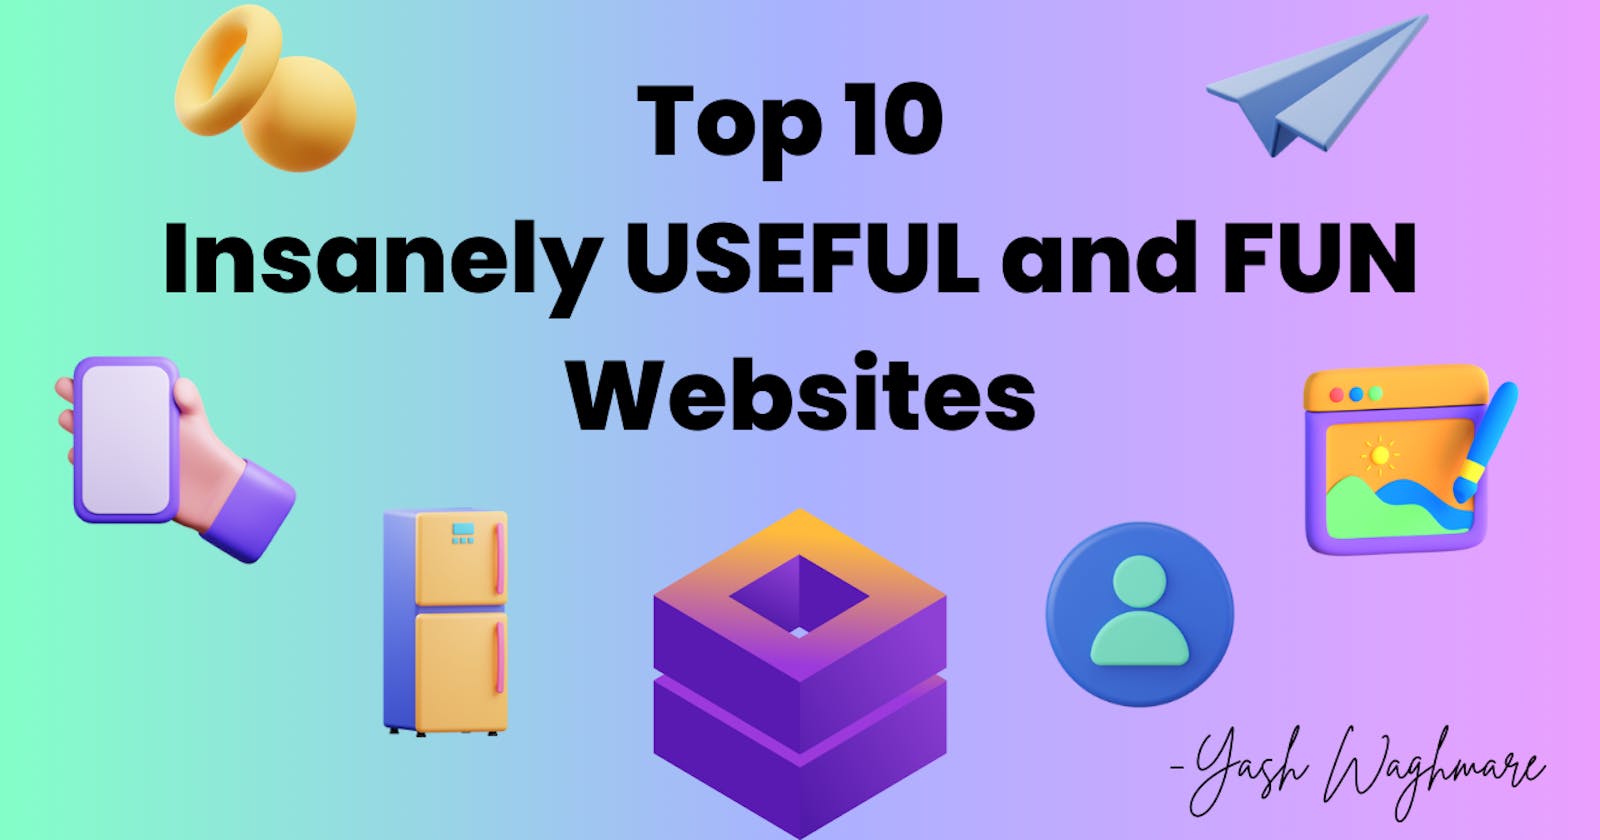 Top 10 Insanely Useful and Fun Websites you must visit 🔥🚀🤩